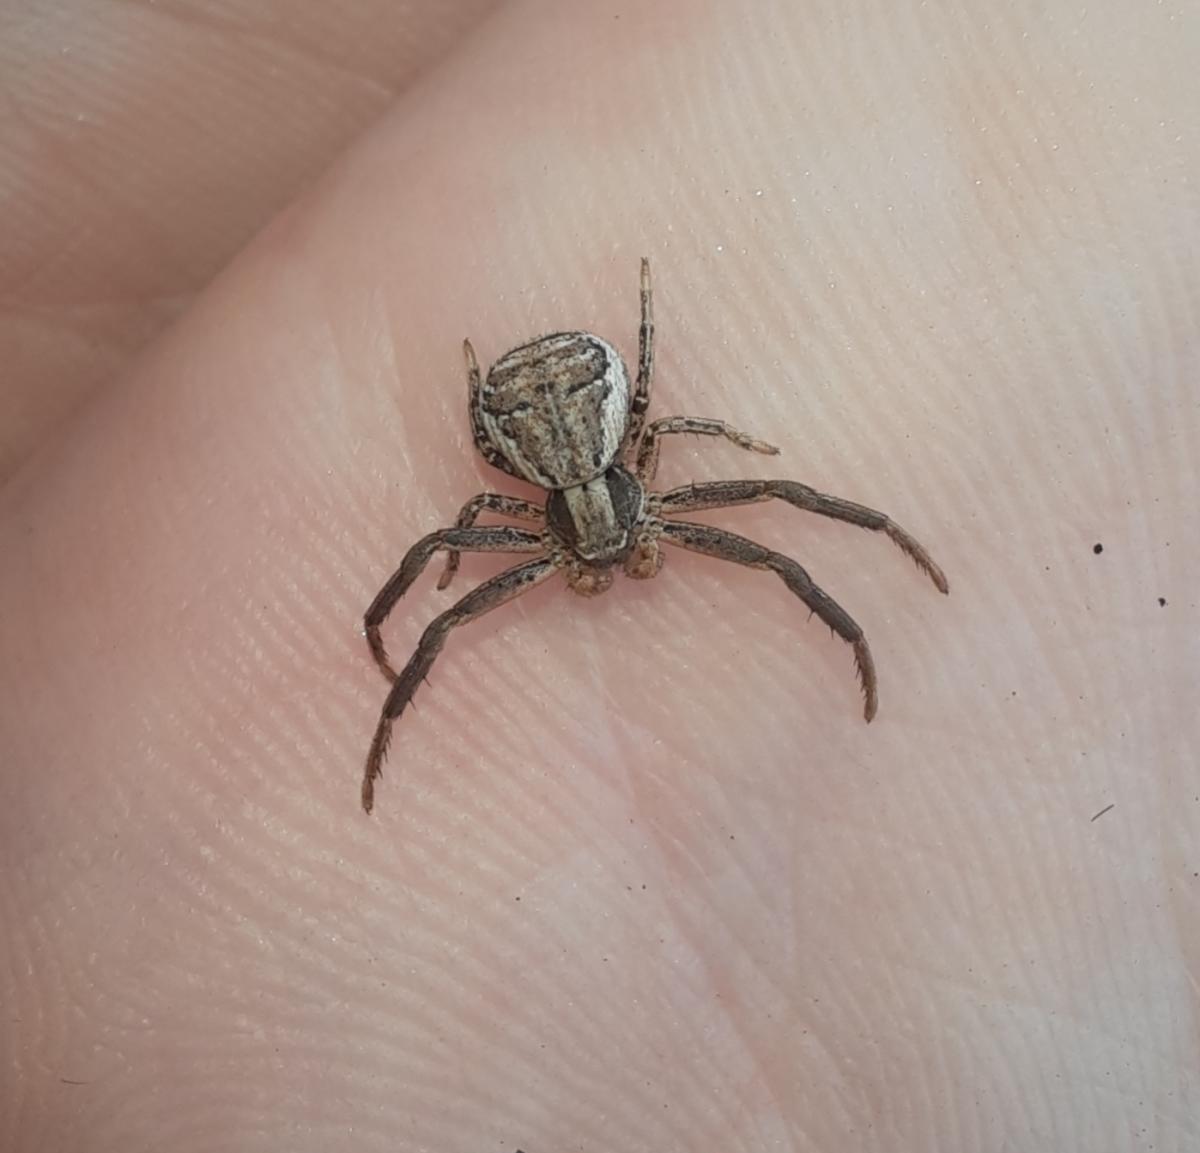 A brown spider sits on a finger